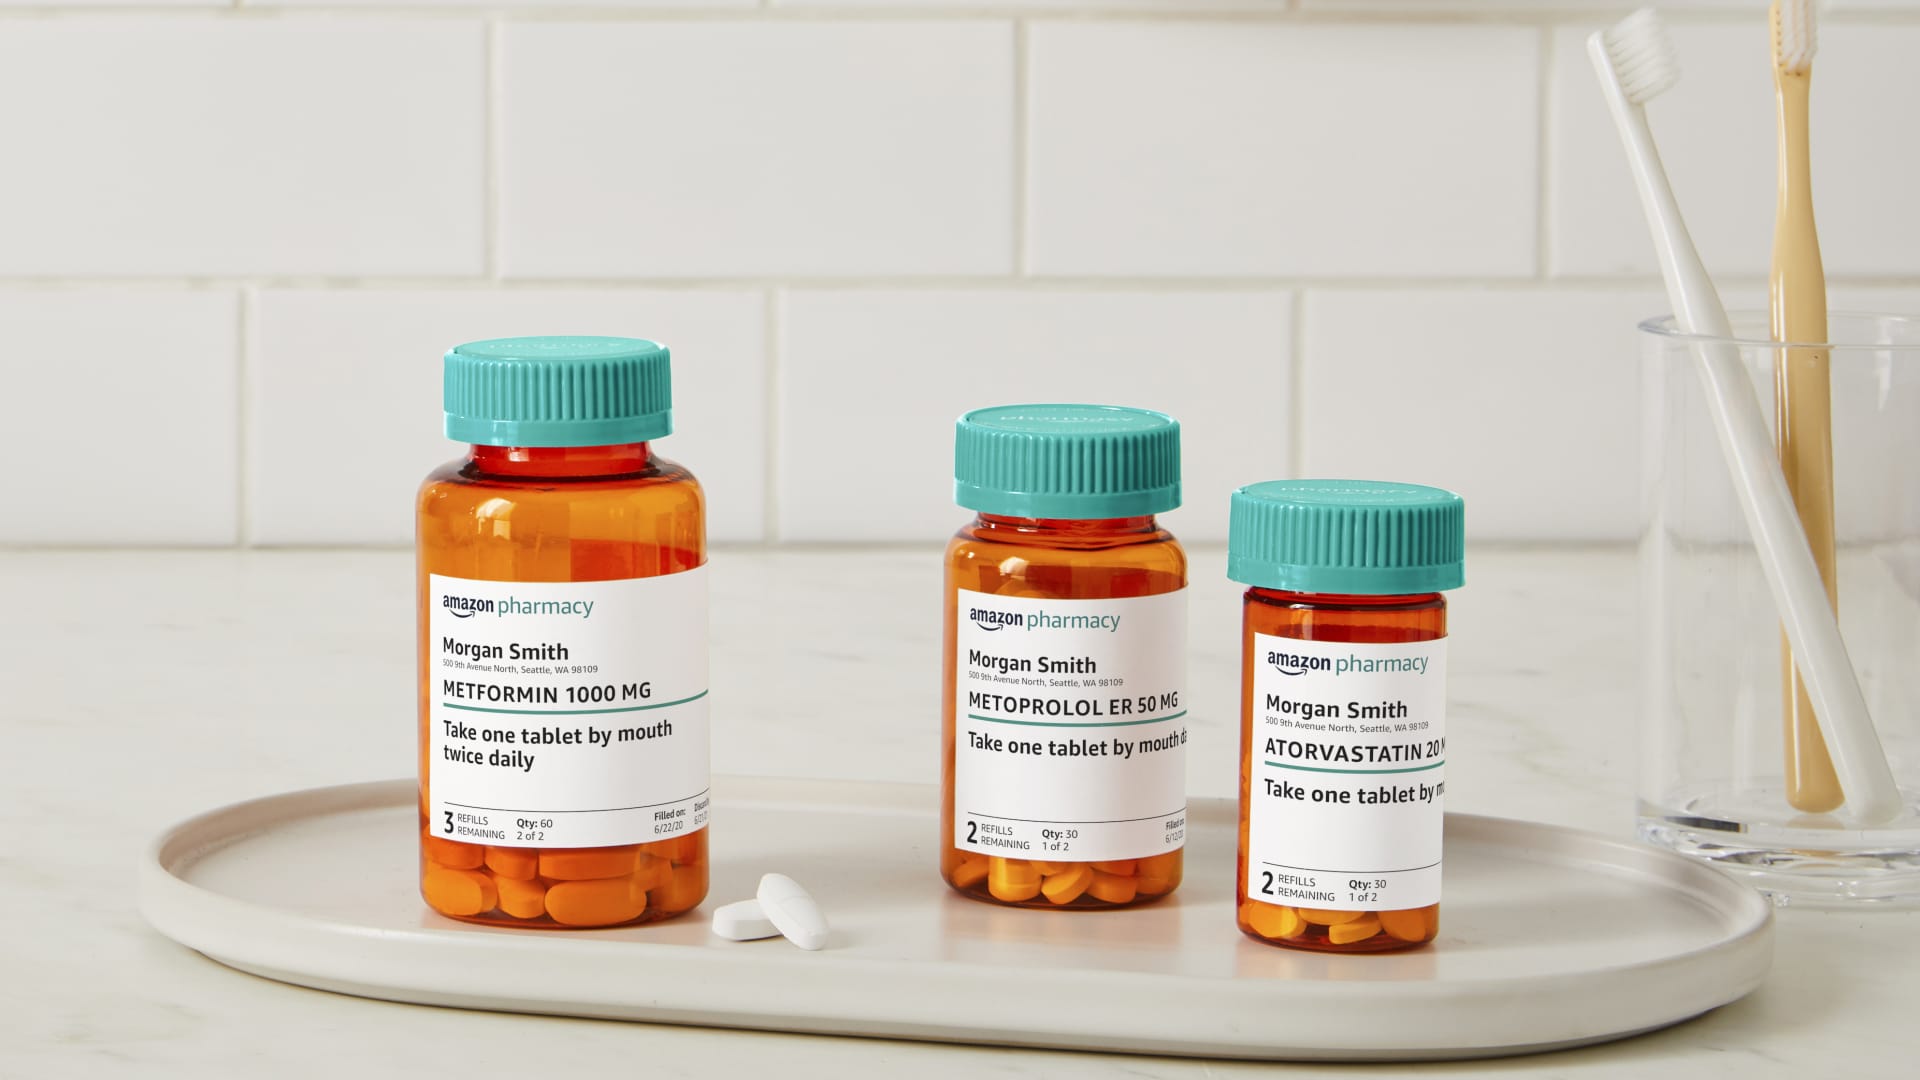 With Amazon Pharmacy, Prime customers in the United States can get their prescription medications shipped to their home for free.